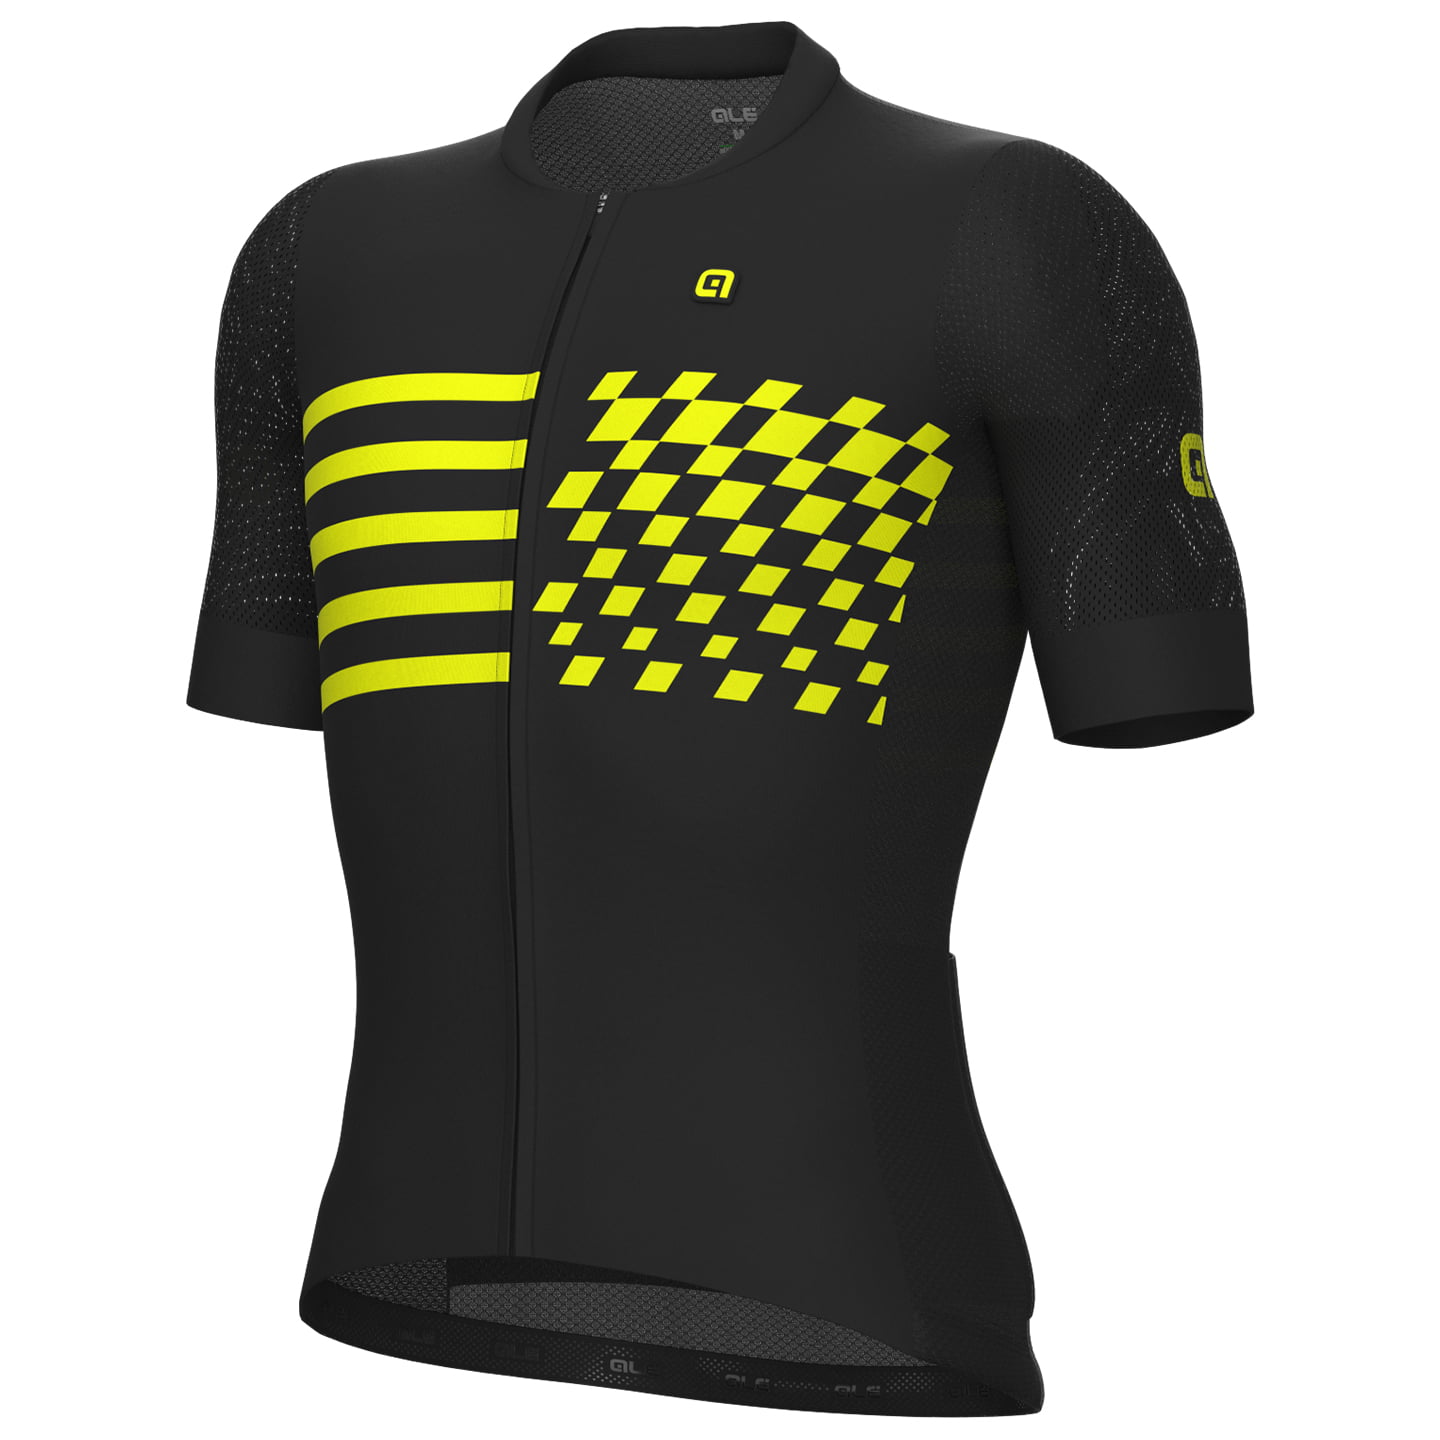 ALE Play Short Sleeve Jersey, for men, size M, Cycling jersey, Cycling clothing